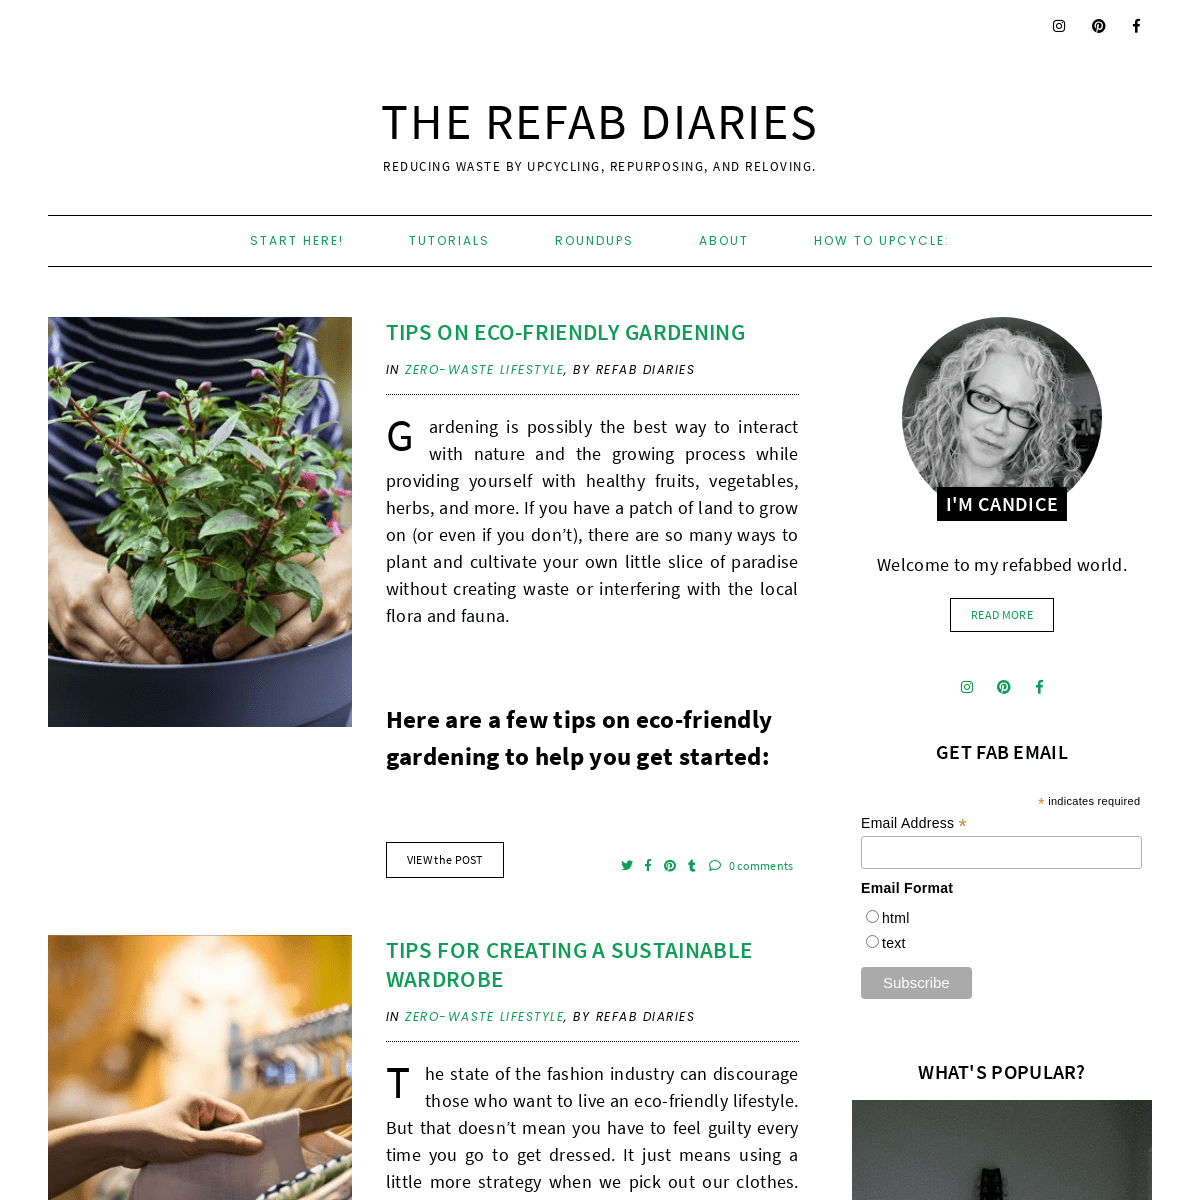 A complete backup of https://refabdiaries.com